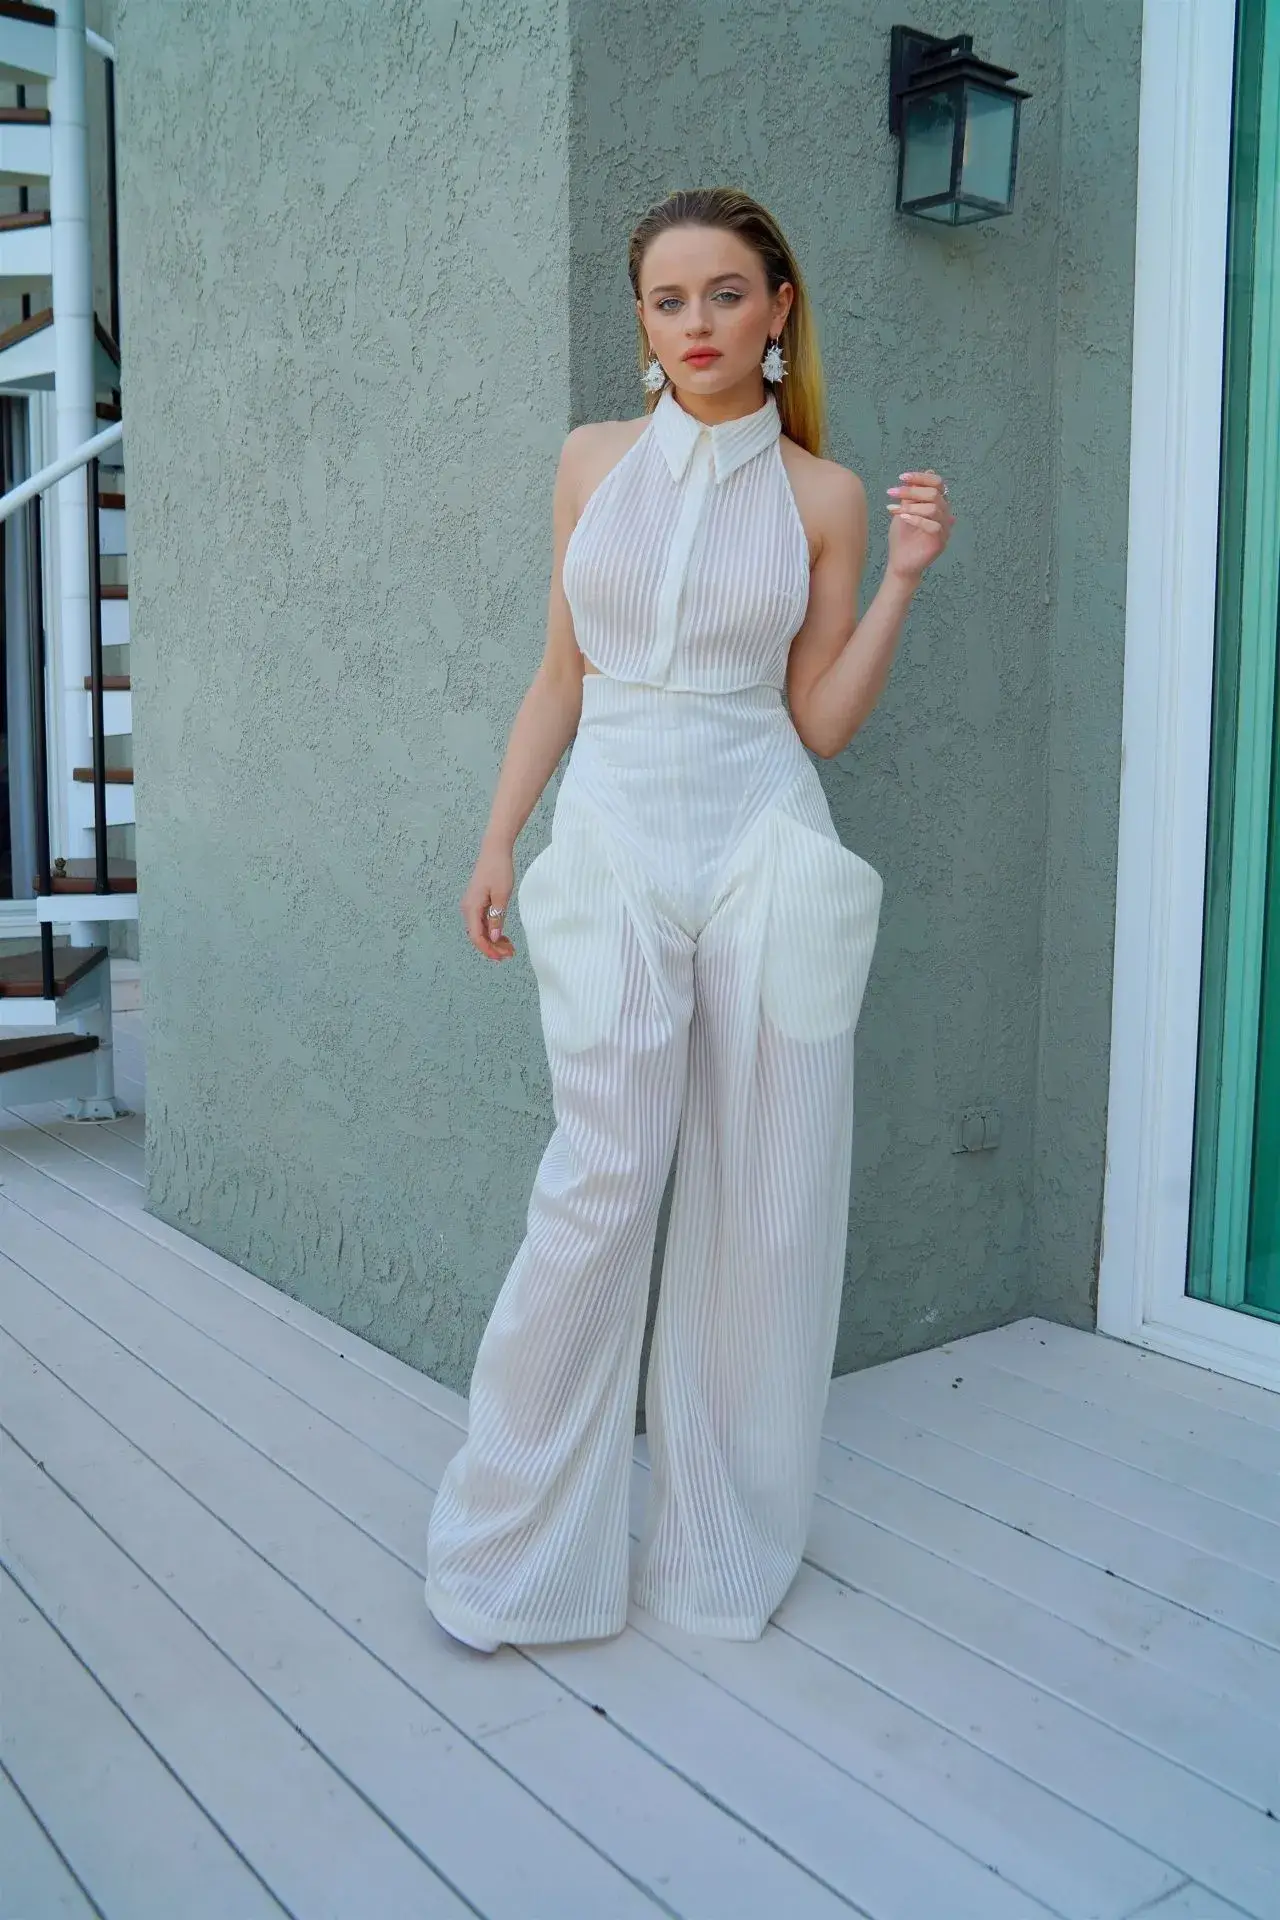 AMERICAN ACTRESS JOEY KING PHOTOSHOOT IN WHITE DRESS 2